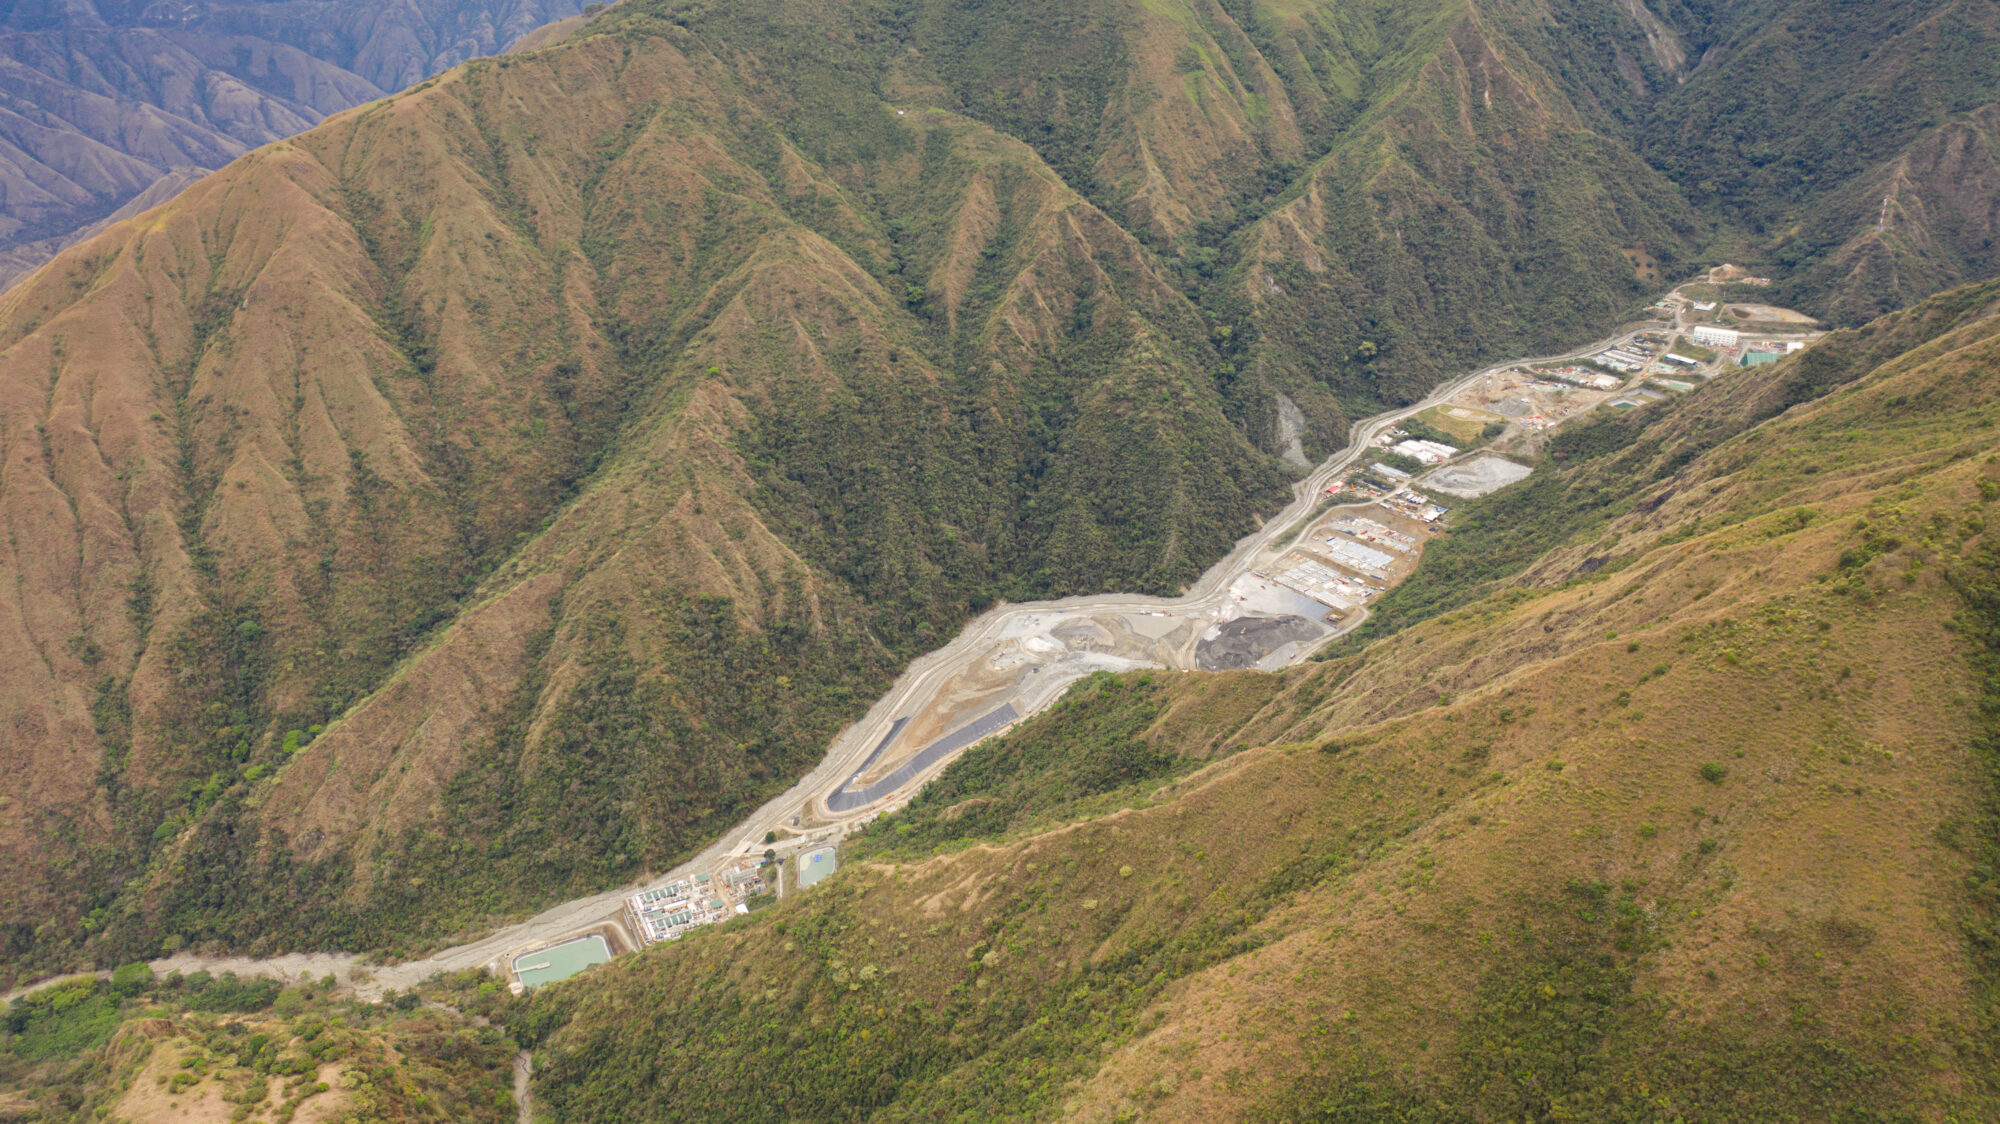 <p>Nestled in the hills of Buriticá municipality lies Zijin&#8217;s gold mine, the first of any Chinese company in Colombia. But local communities want assurances from its new owners about water supplies and the continuation of informal mining (image: Ernst Udo Drawert)</p>